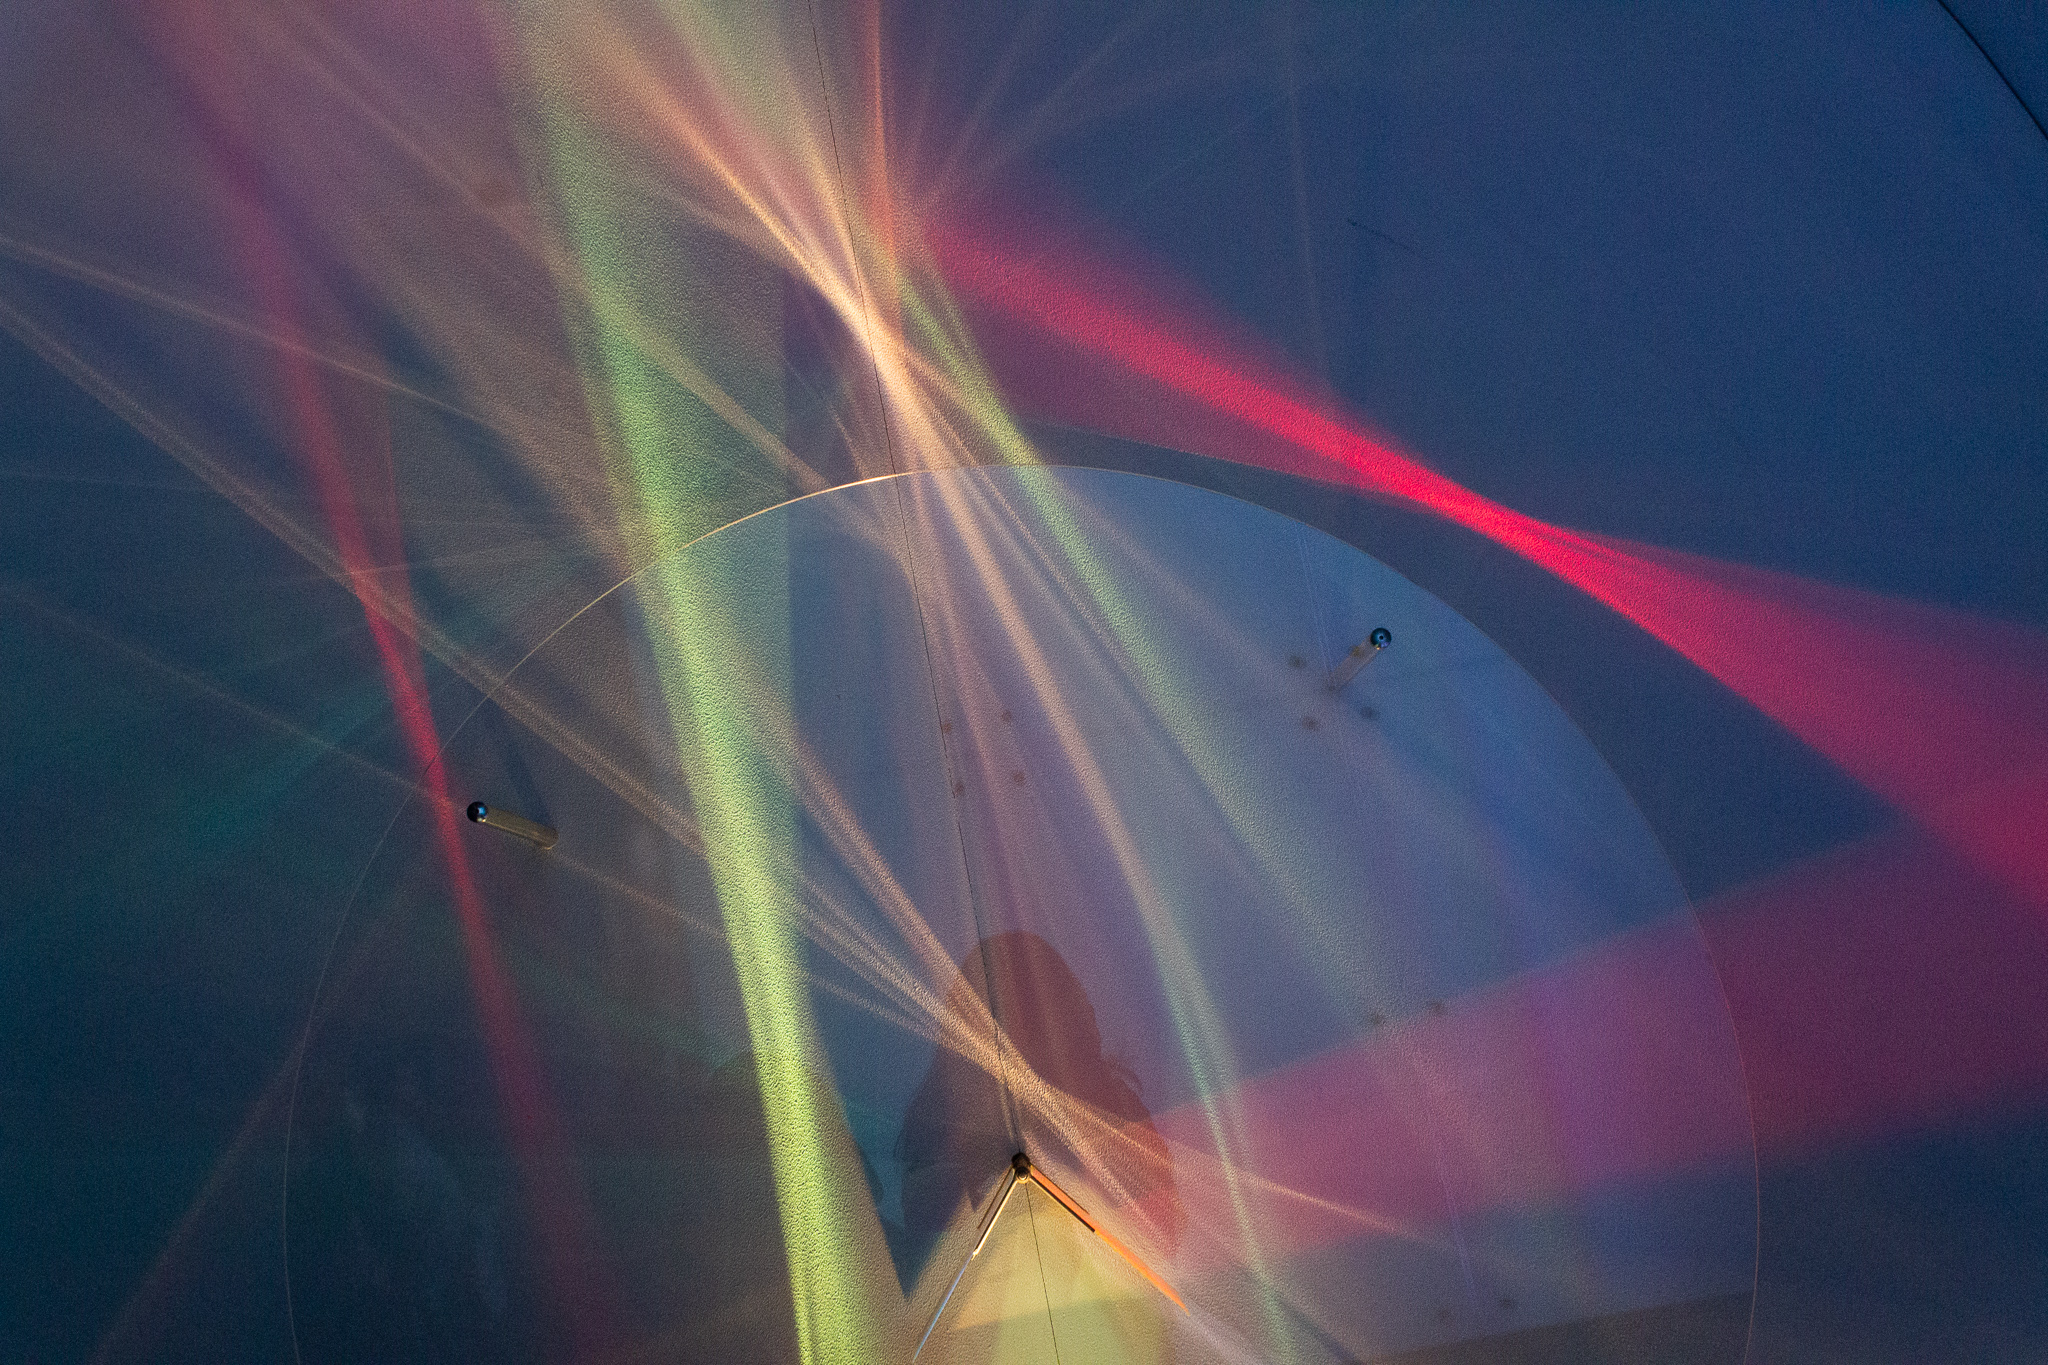 Beams of pastel-colored refracted light with the faint shadow of the photographer in the center